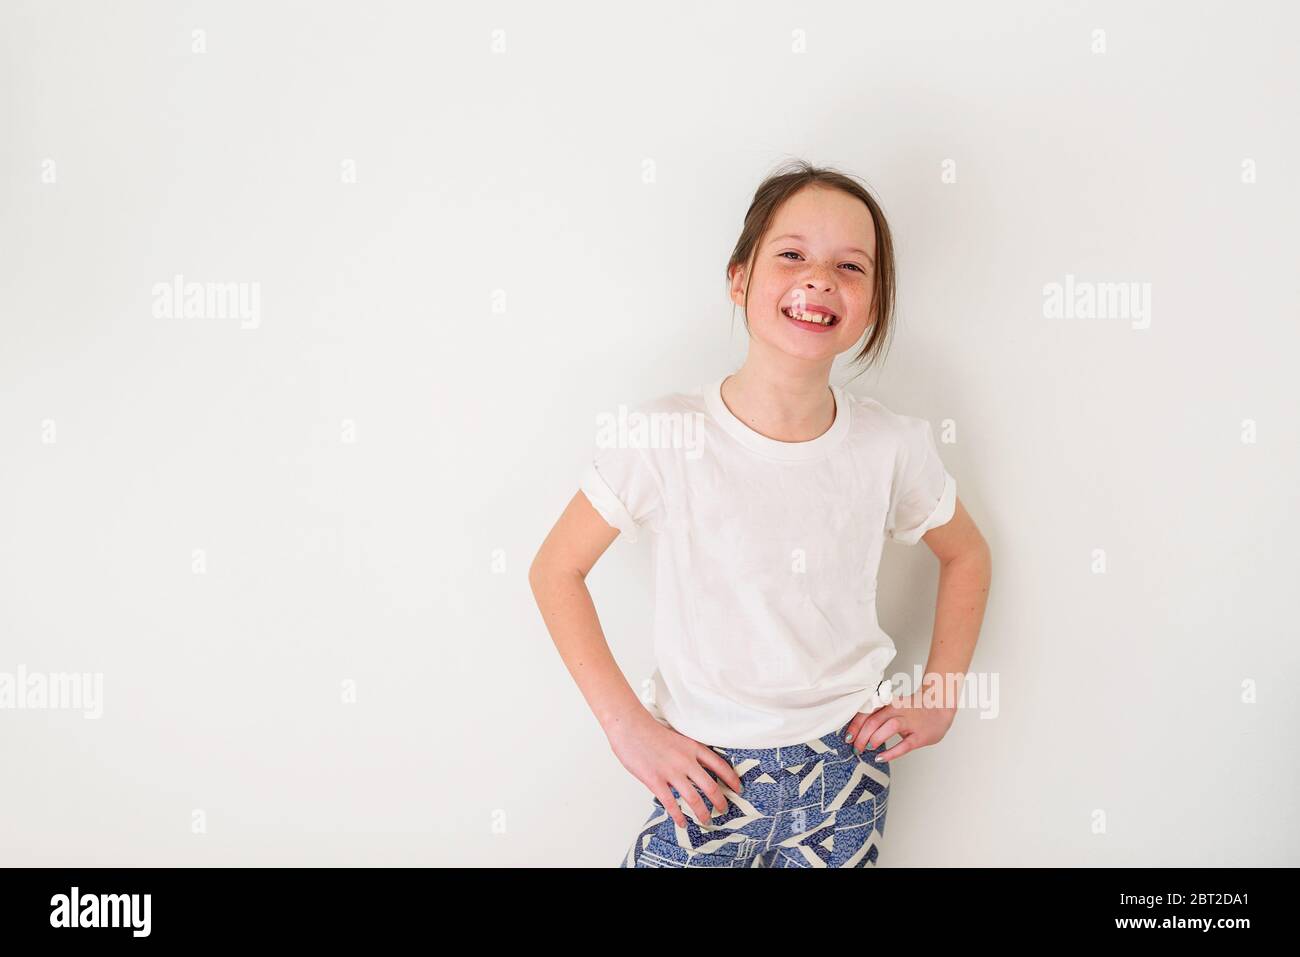 Portrait of a happy girl smiling Stock Photo